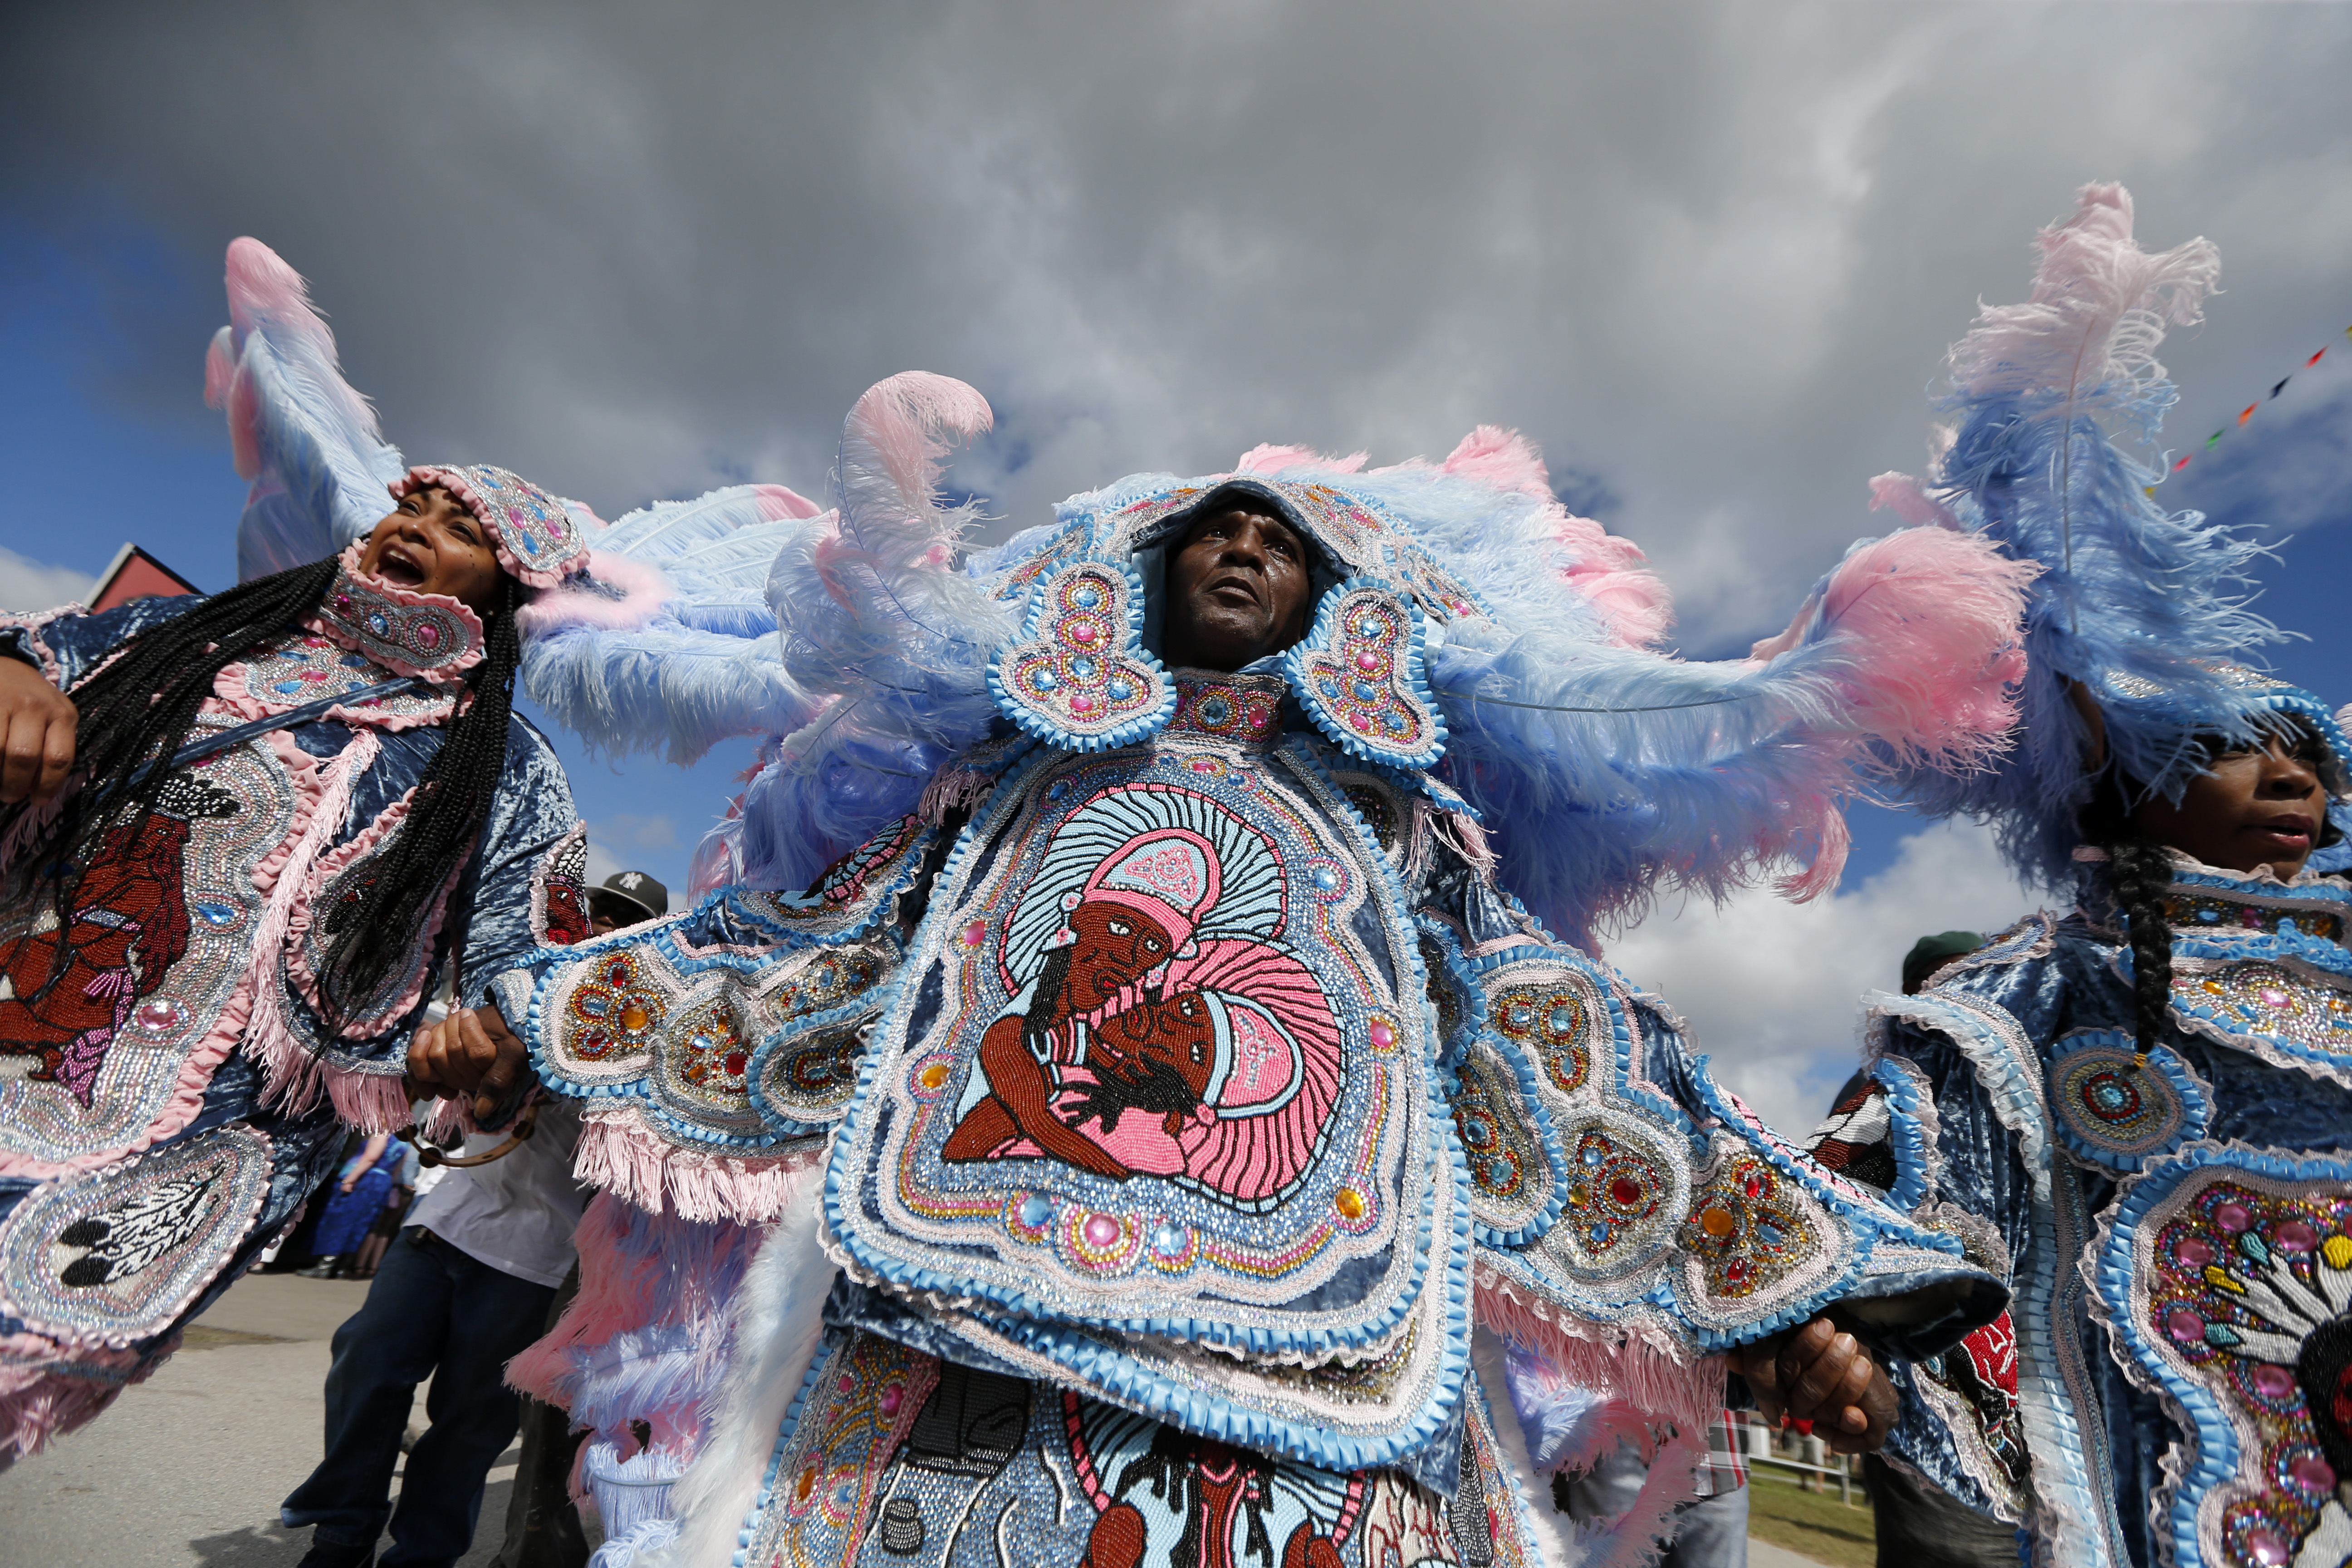 The Cheyenne and 7th Ward Creole Hunters Mardi Gras Indians second line through the crowd at the New Orleans Jazz and Heritage Festival in New Orleans, Thursday, May 4, 2017. (AP Photo/Gerald Herbert)